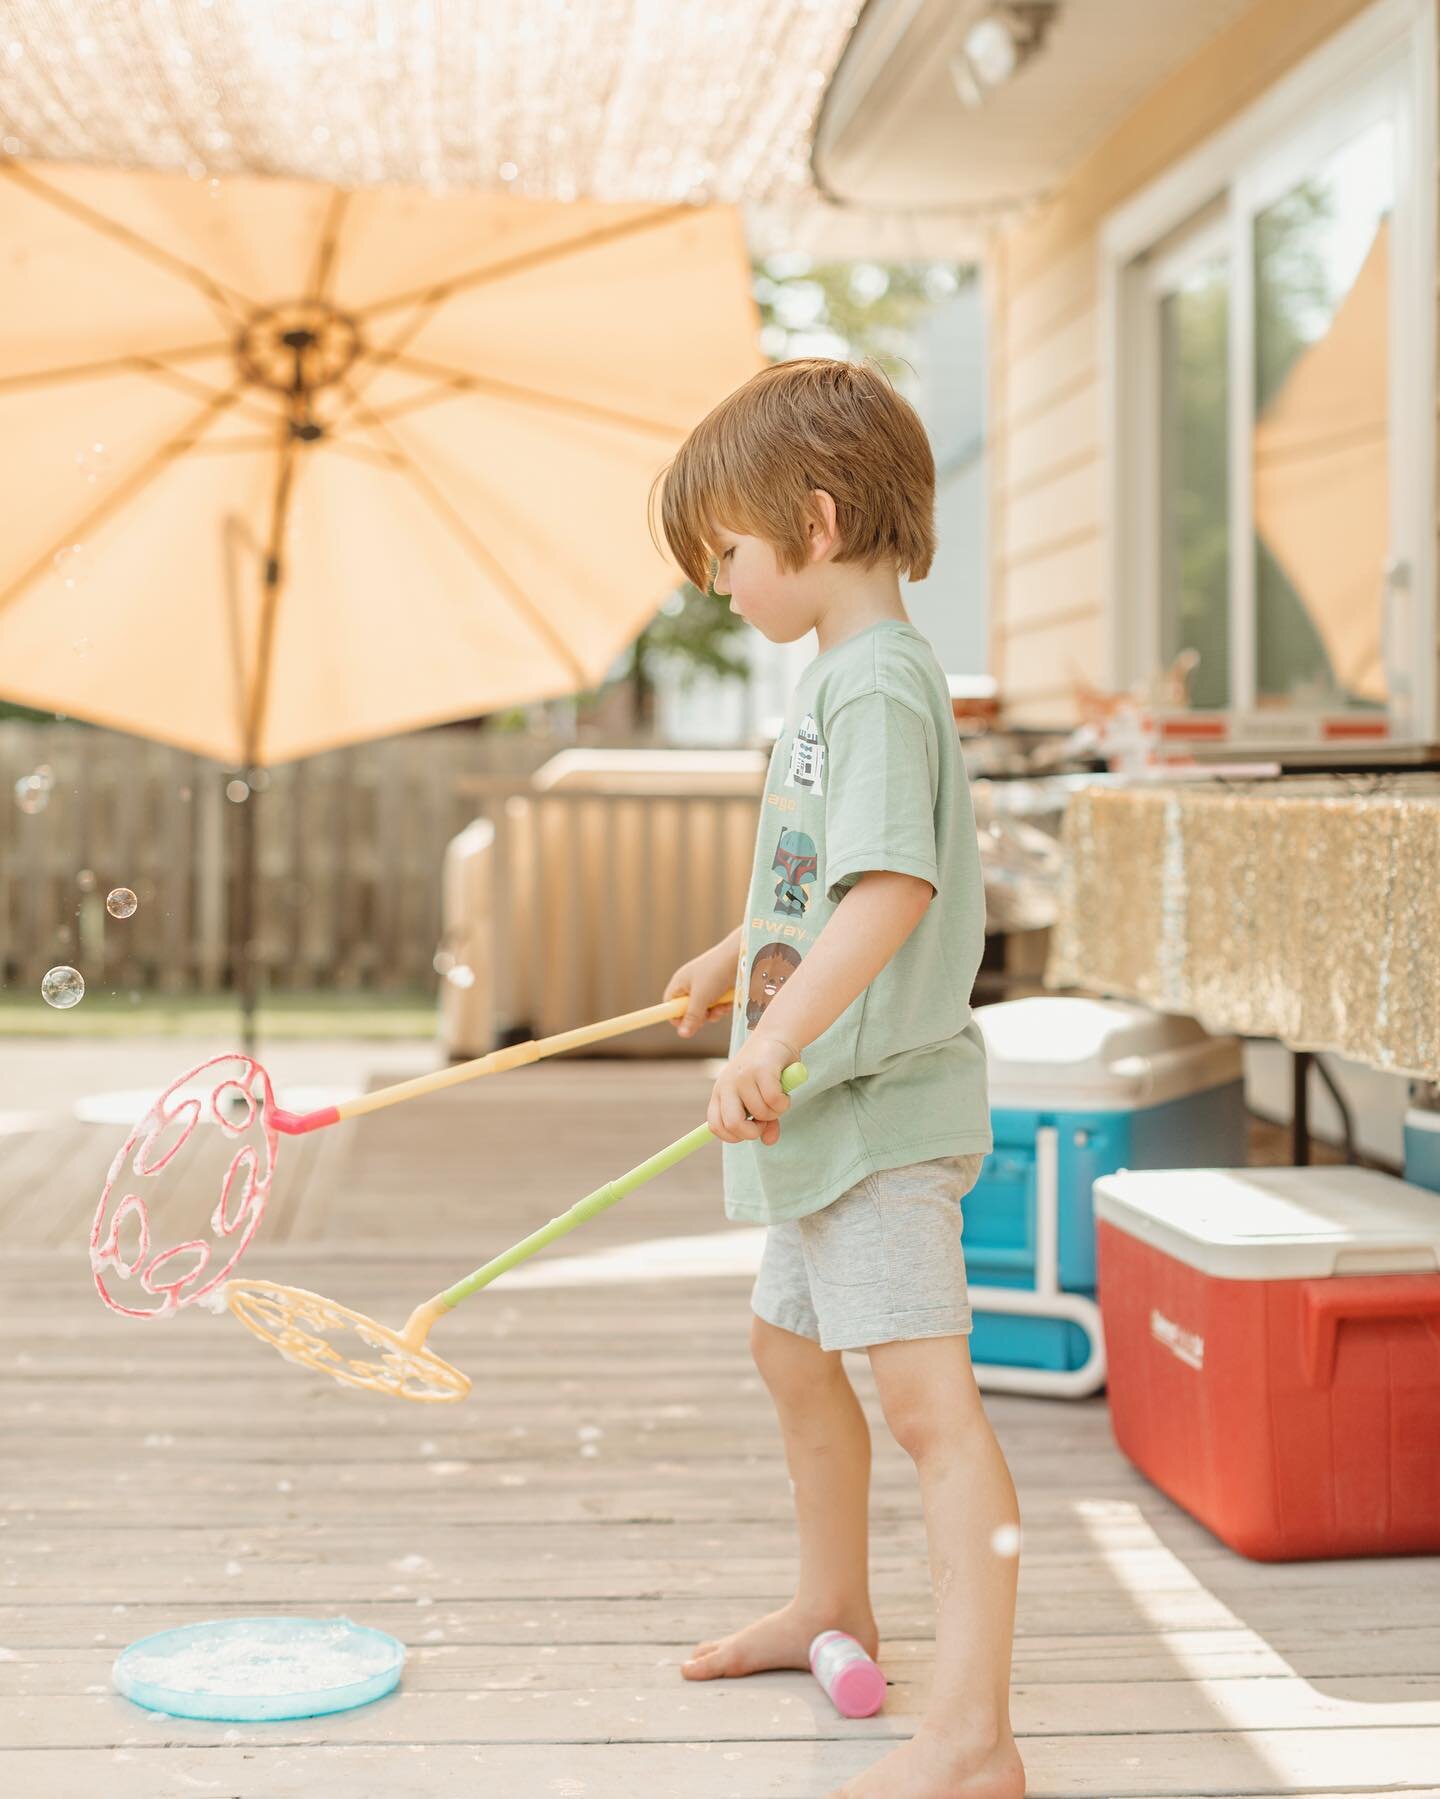 Weekend vibes = bare feet, bubbles, coolers with beverages and sunshine! Sending healthy and happy summer fun your way!! ☀️ 

#philadelphiaphotographer #brandimagery #summerfun #parenting #familyfun #commercialphotography #kids #outdoors #bubbles